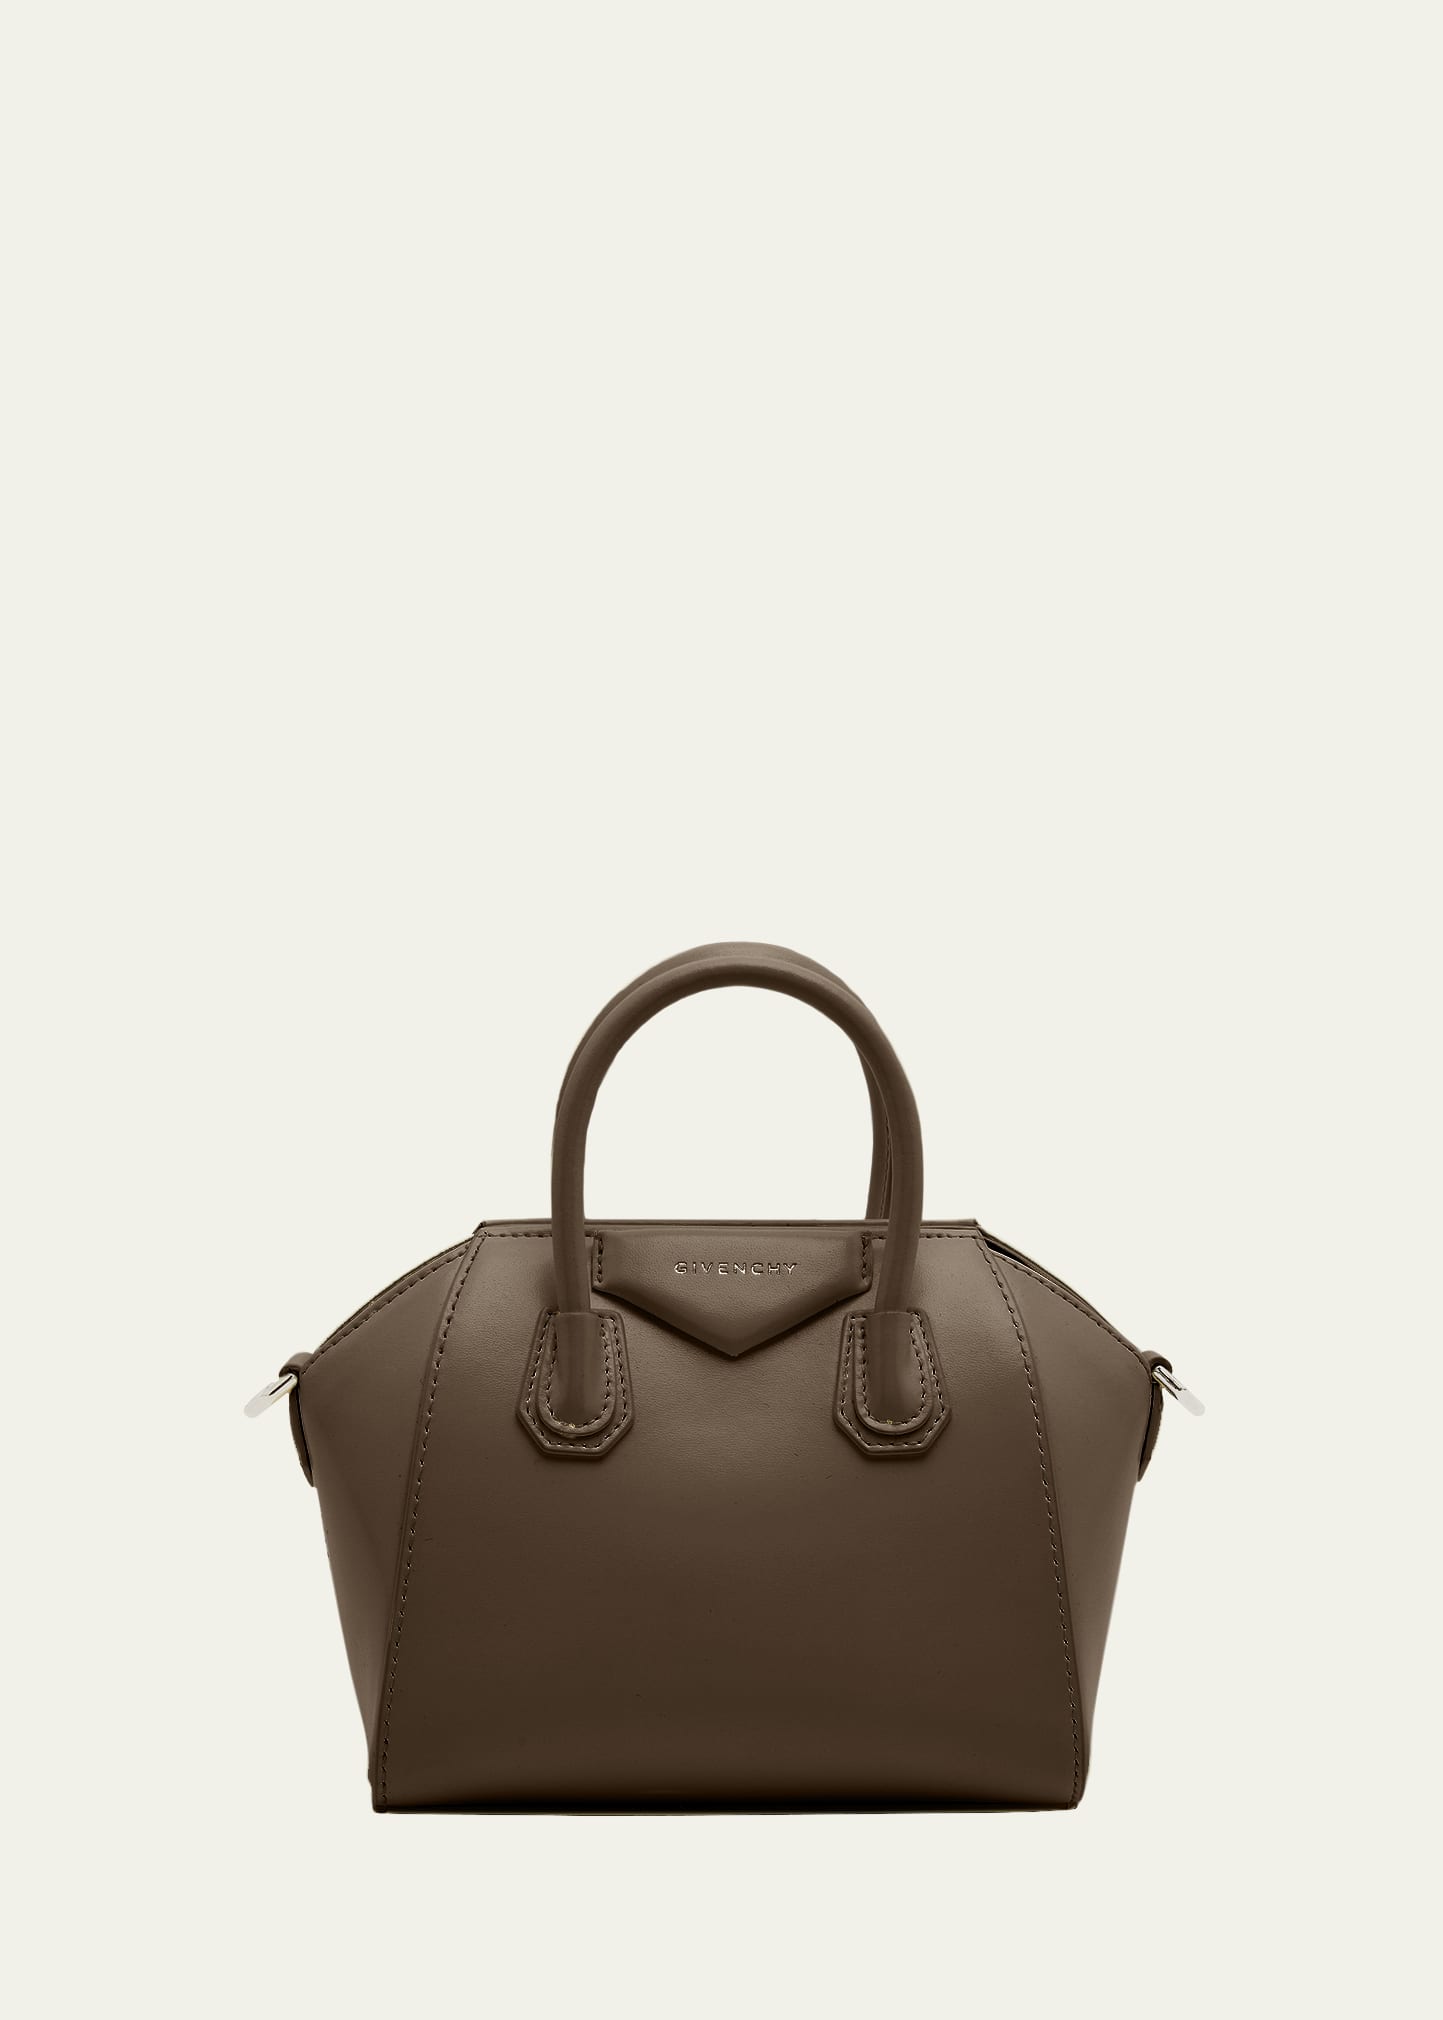 Givenchy Antigona Toy Top Handle Bag In Box Leather In Taupe